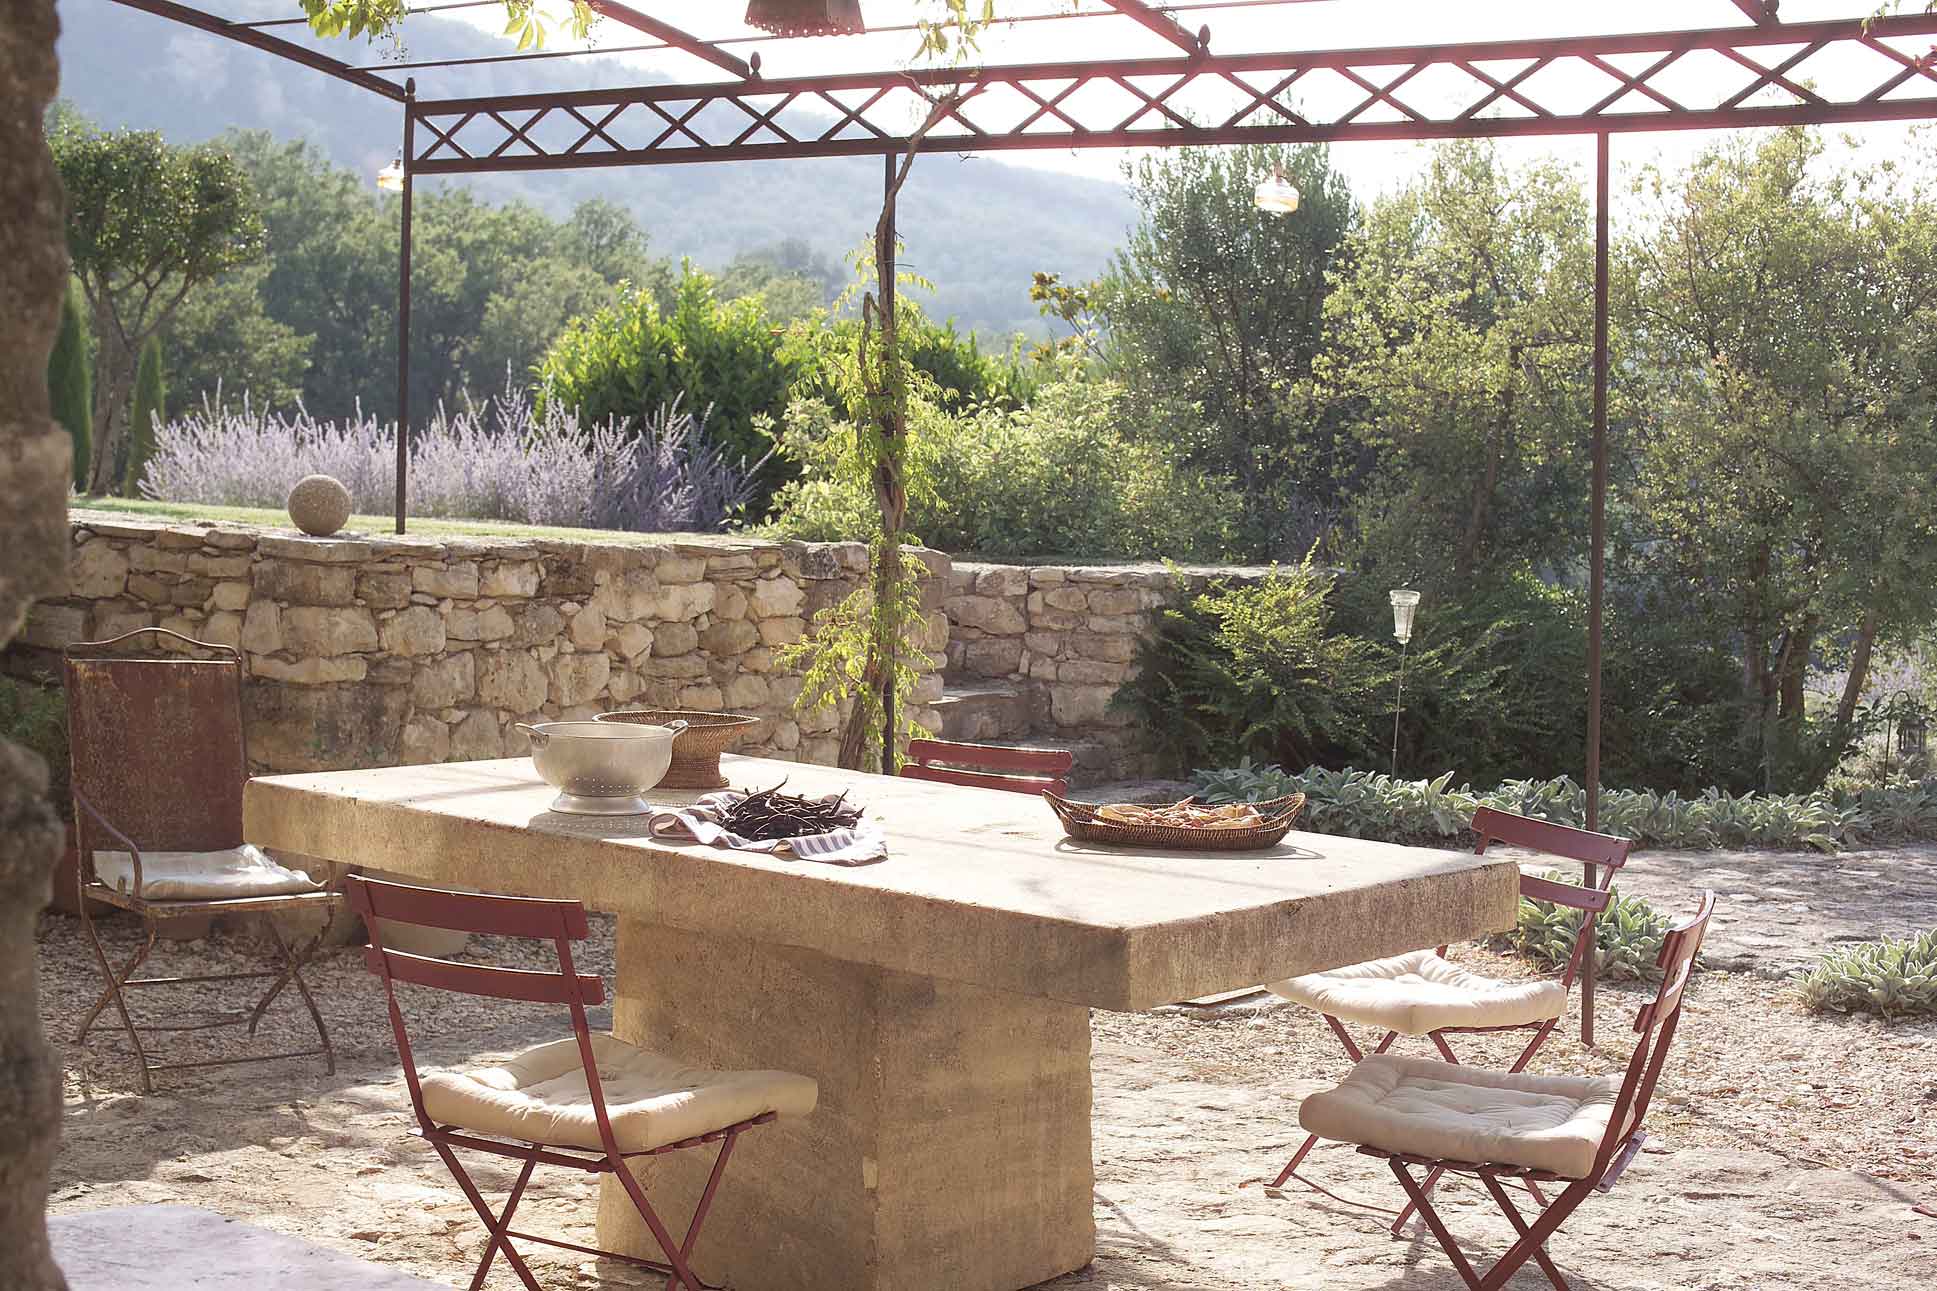 A stone table for outside dining